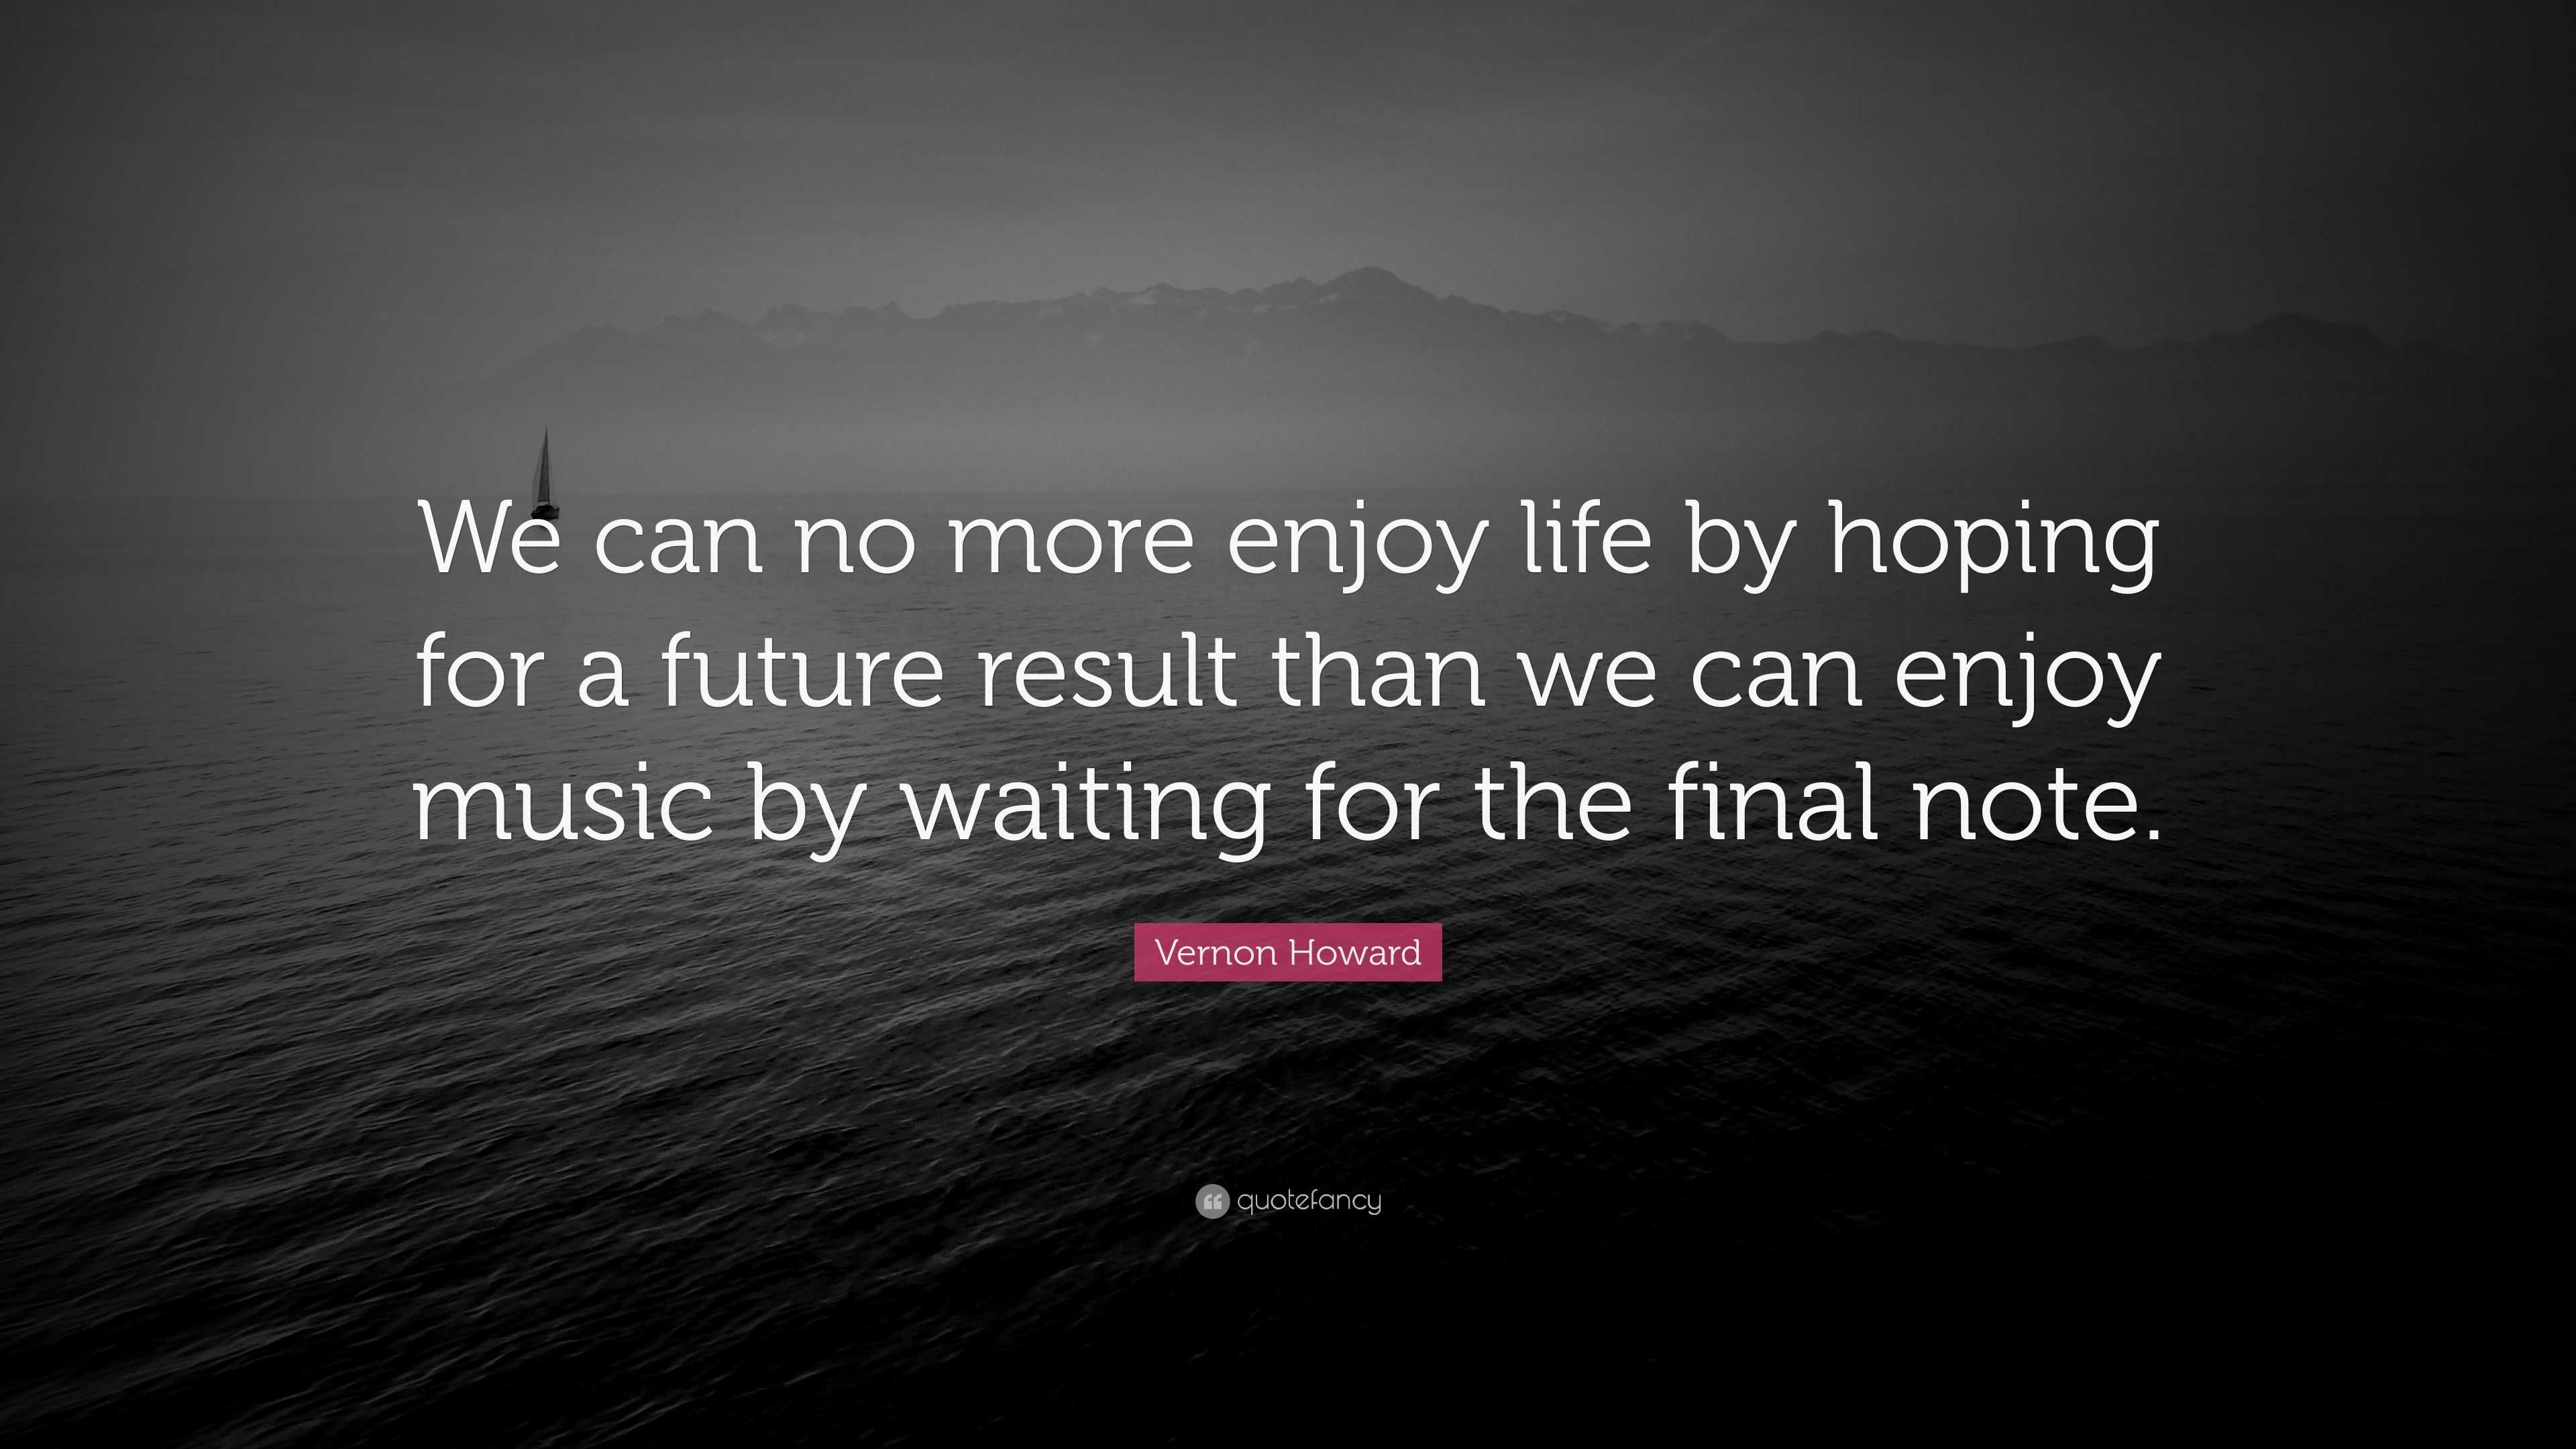 Vernon Howard Quote: “We can no more enjoy life by hoping for a future ...